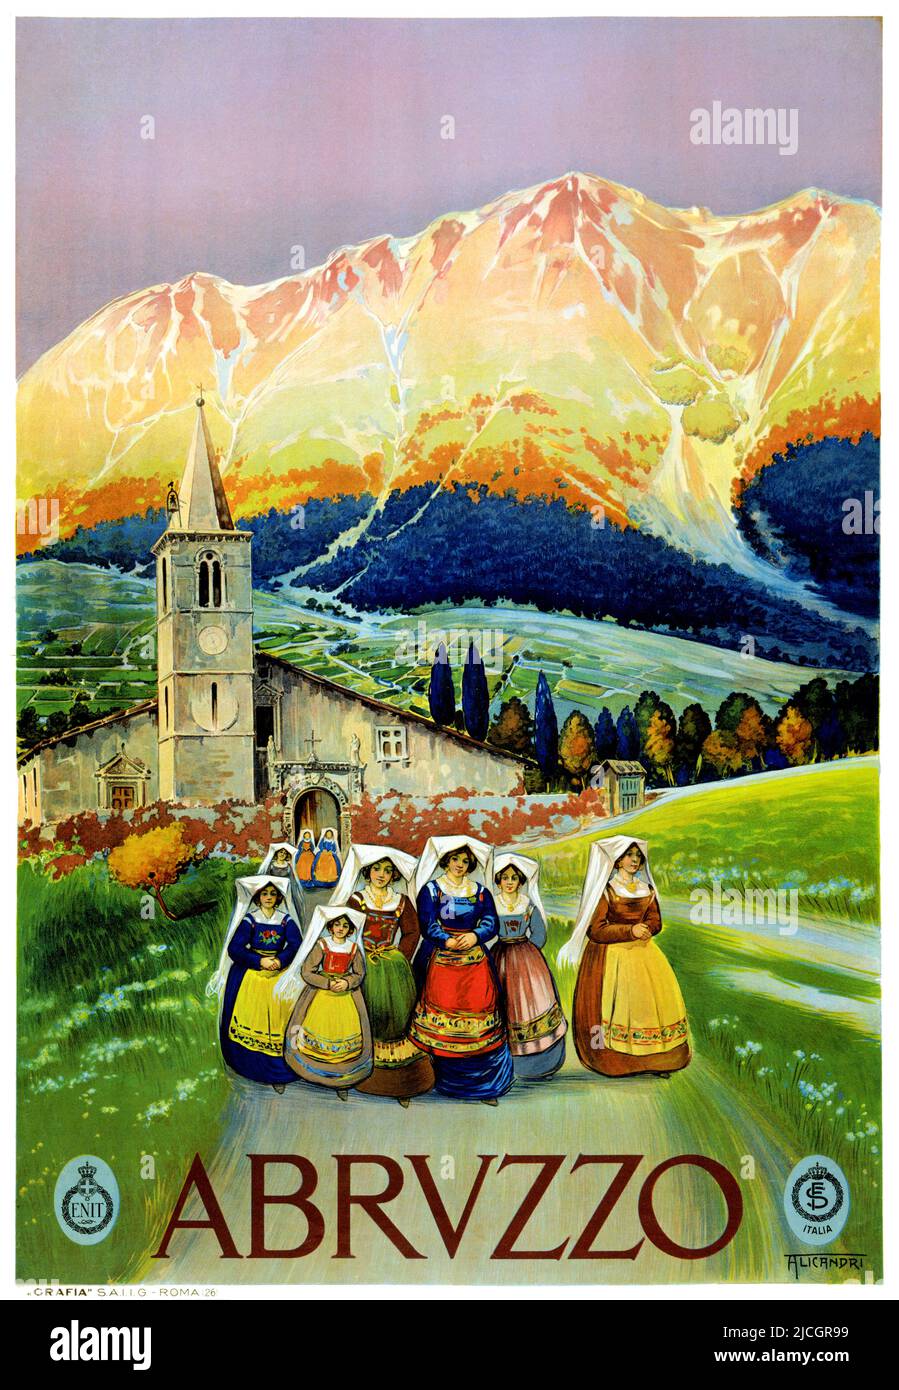 Abruzzo by Vincenzo Alicandri (1871-1955). Poster published in 1928 in Italy. Stock Photo